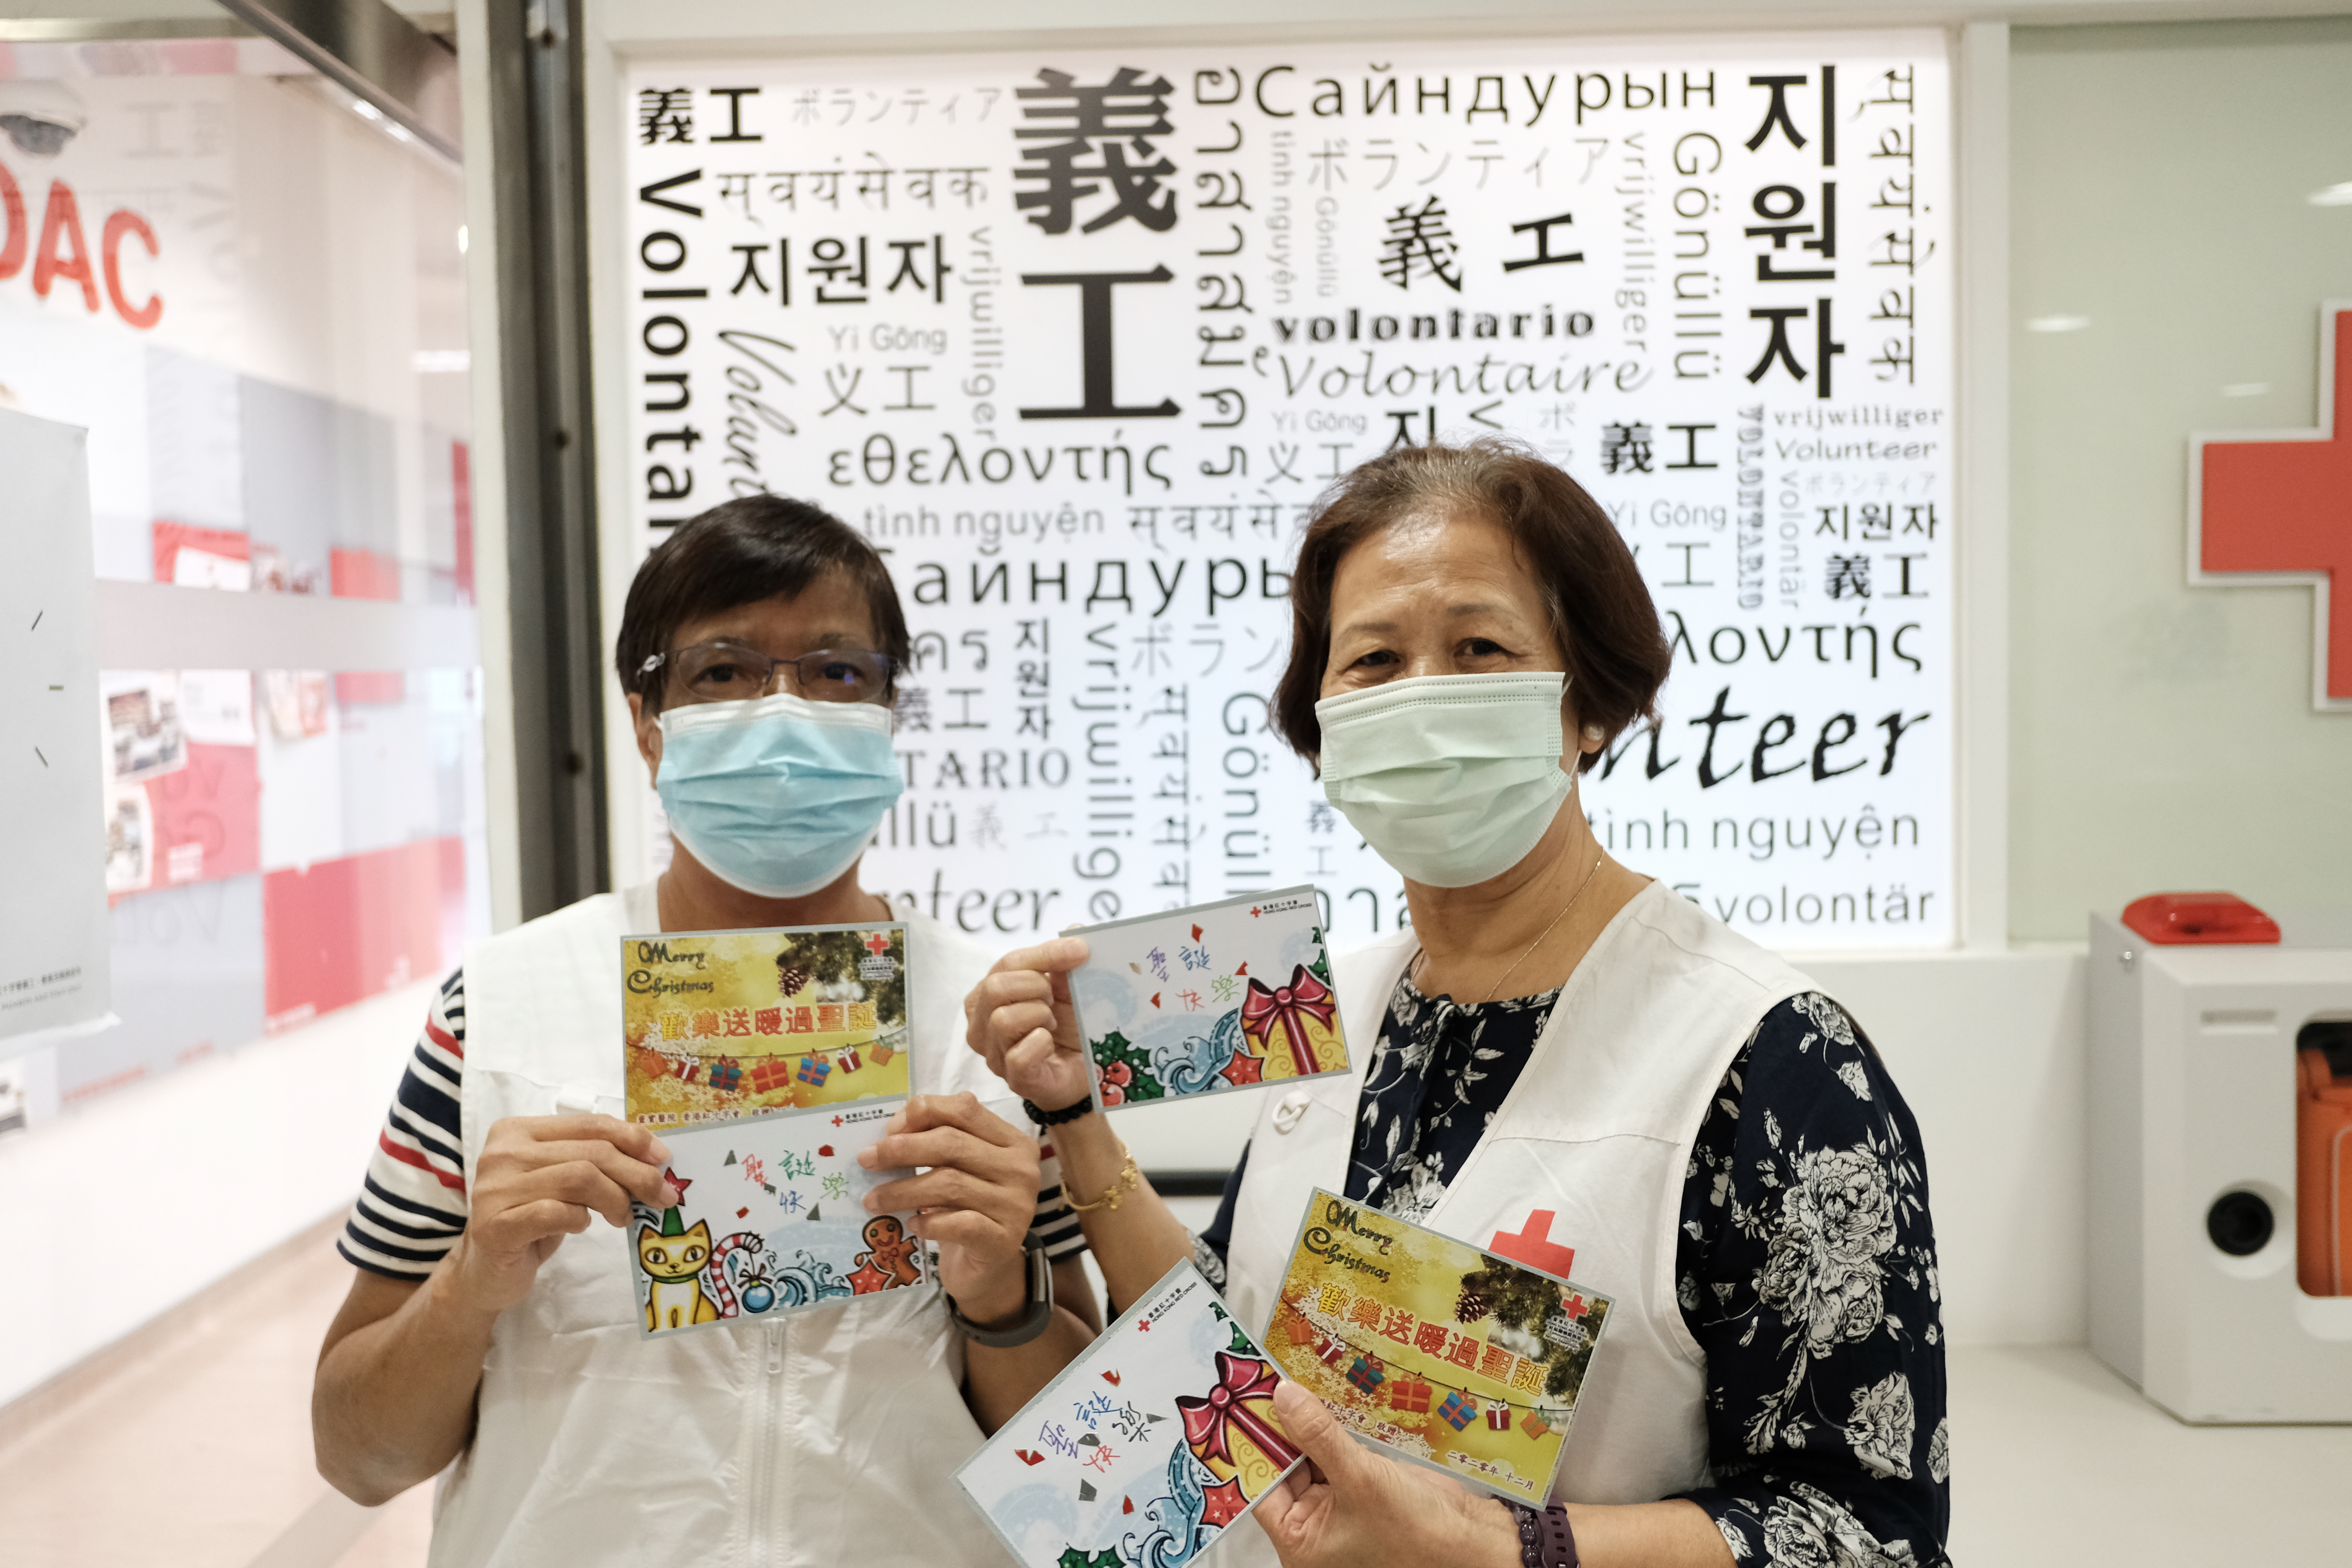 Pik-ha and Siu-har also helped prepare Christmas gift bags to bring festive atmosphere to patients.